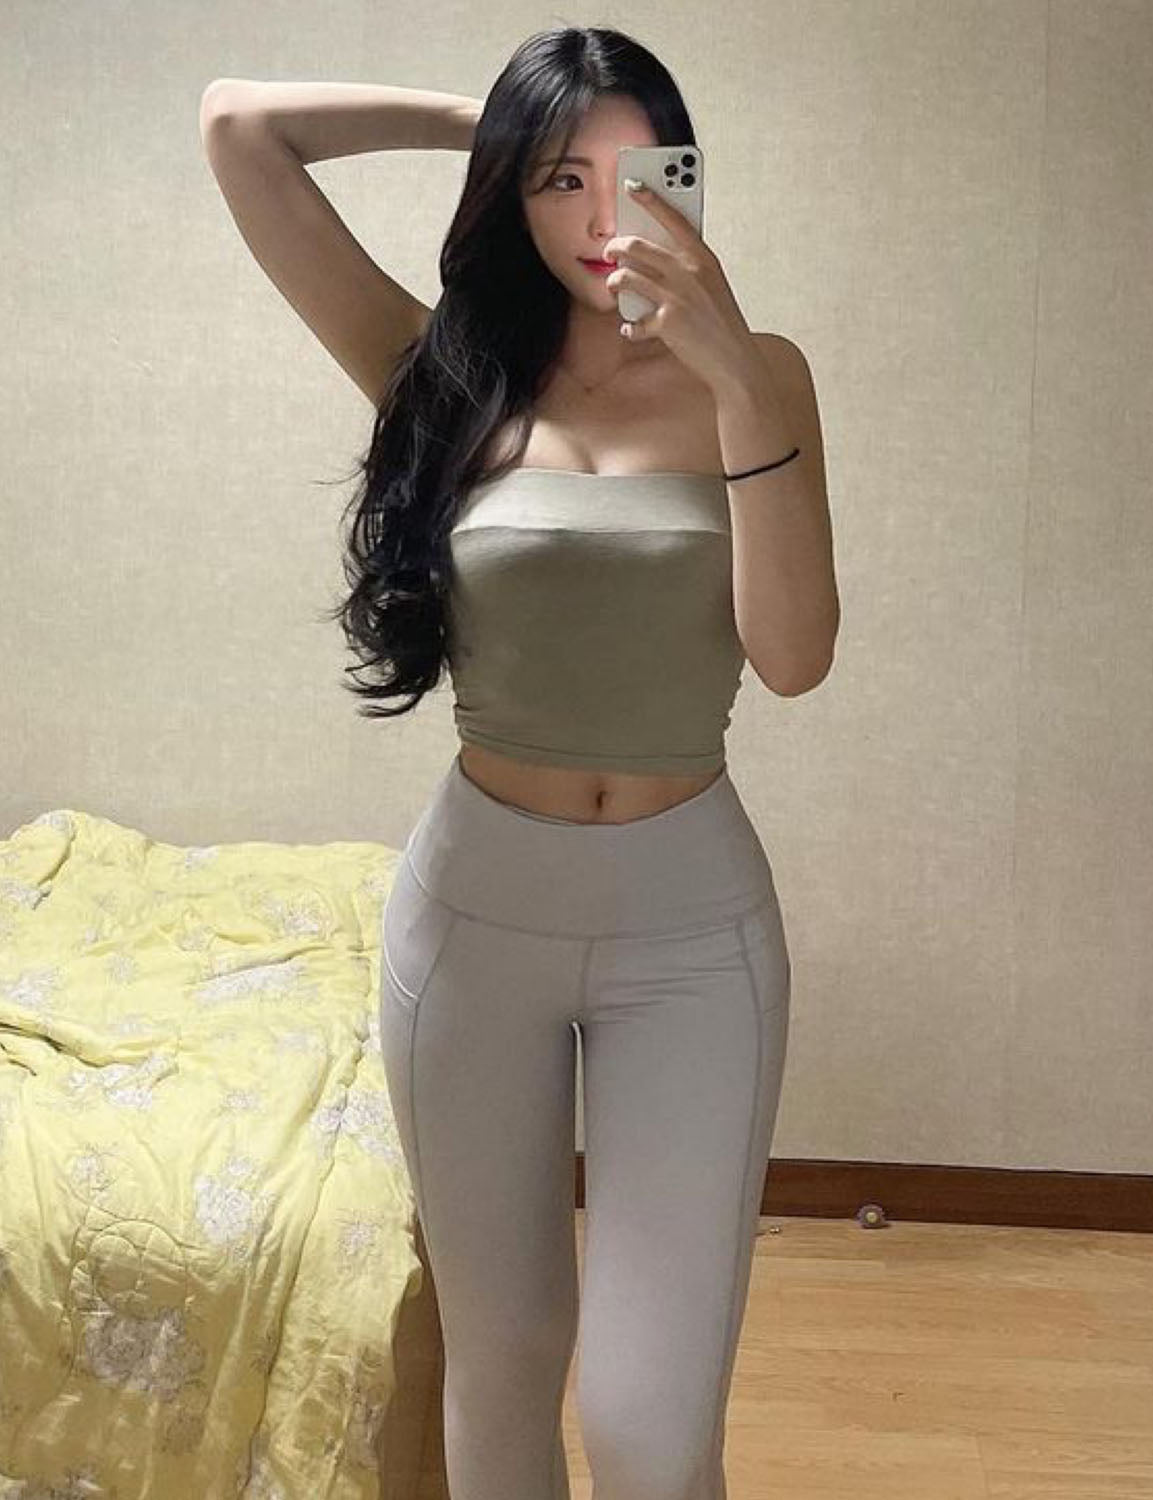 High Waist Side Pockets yogastudio Pants lightgray 75% Nylon, 25% Spandex Fabric doesn't attract lint easily 4-way stretch No see-through Moisture-wicking Tummy control Inner pocket